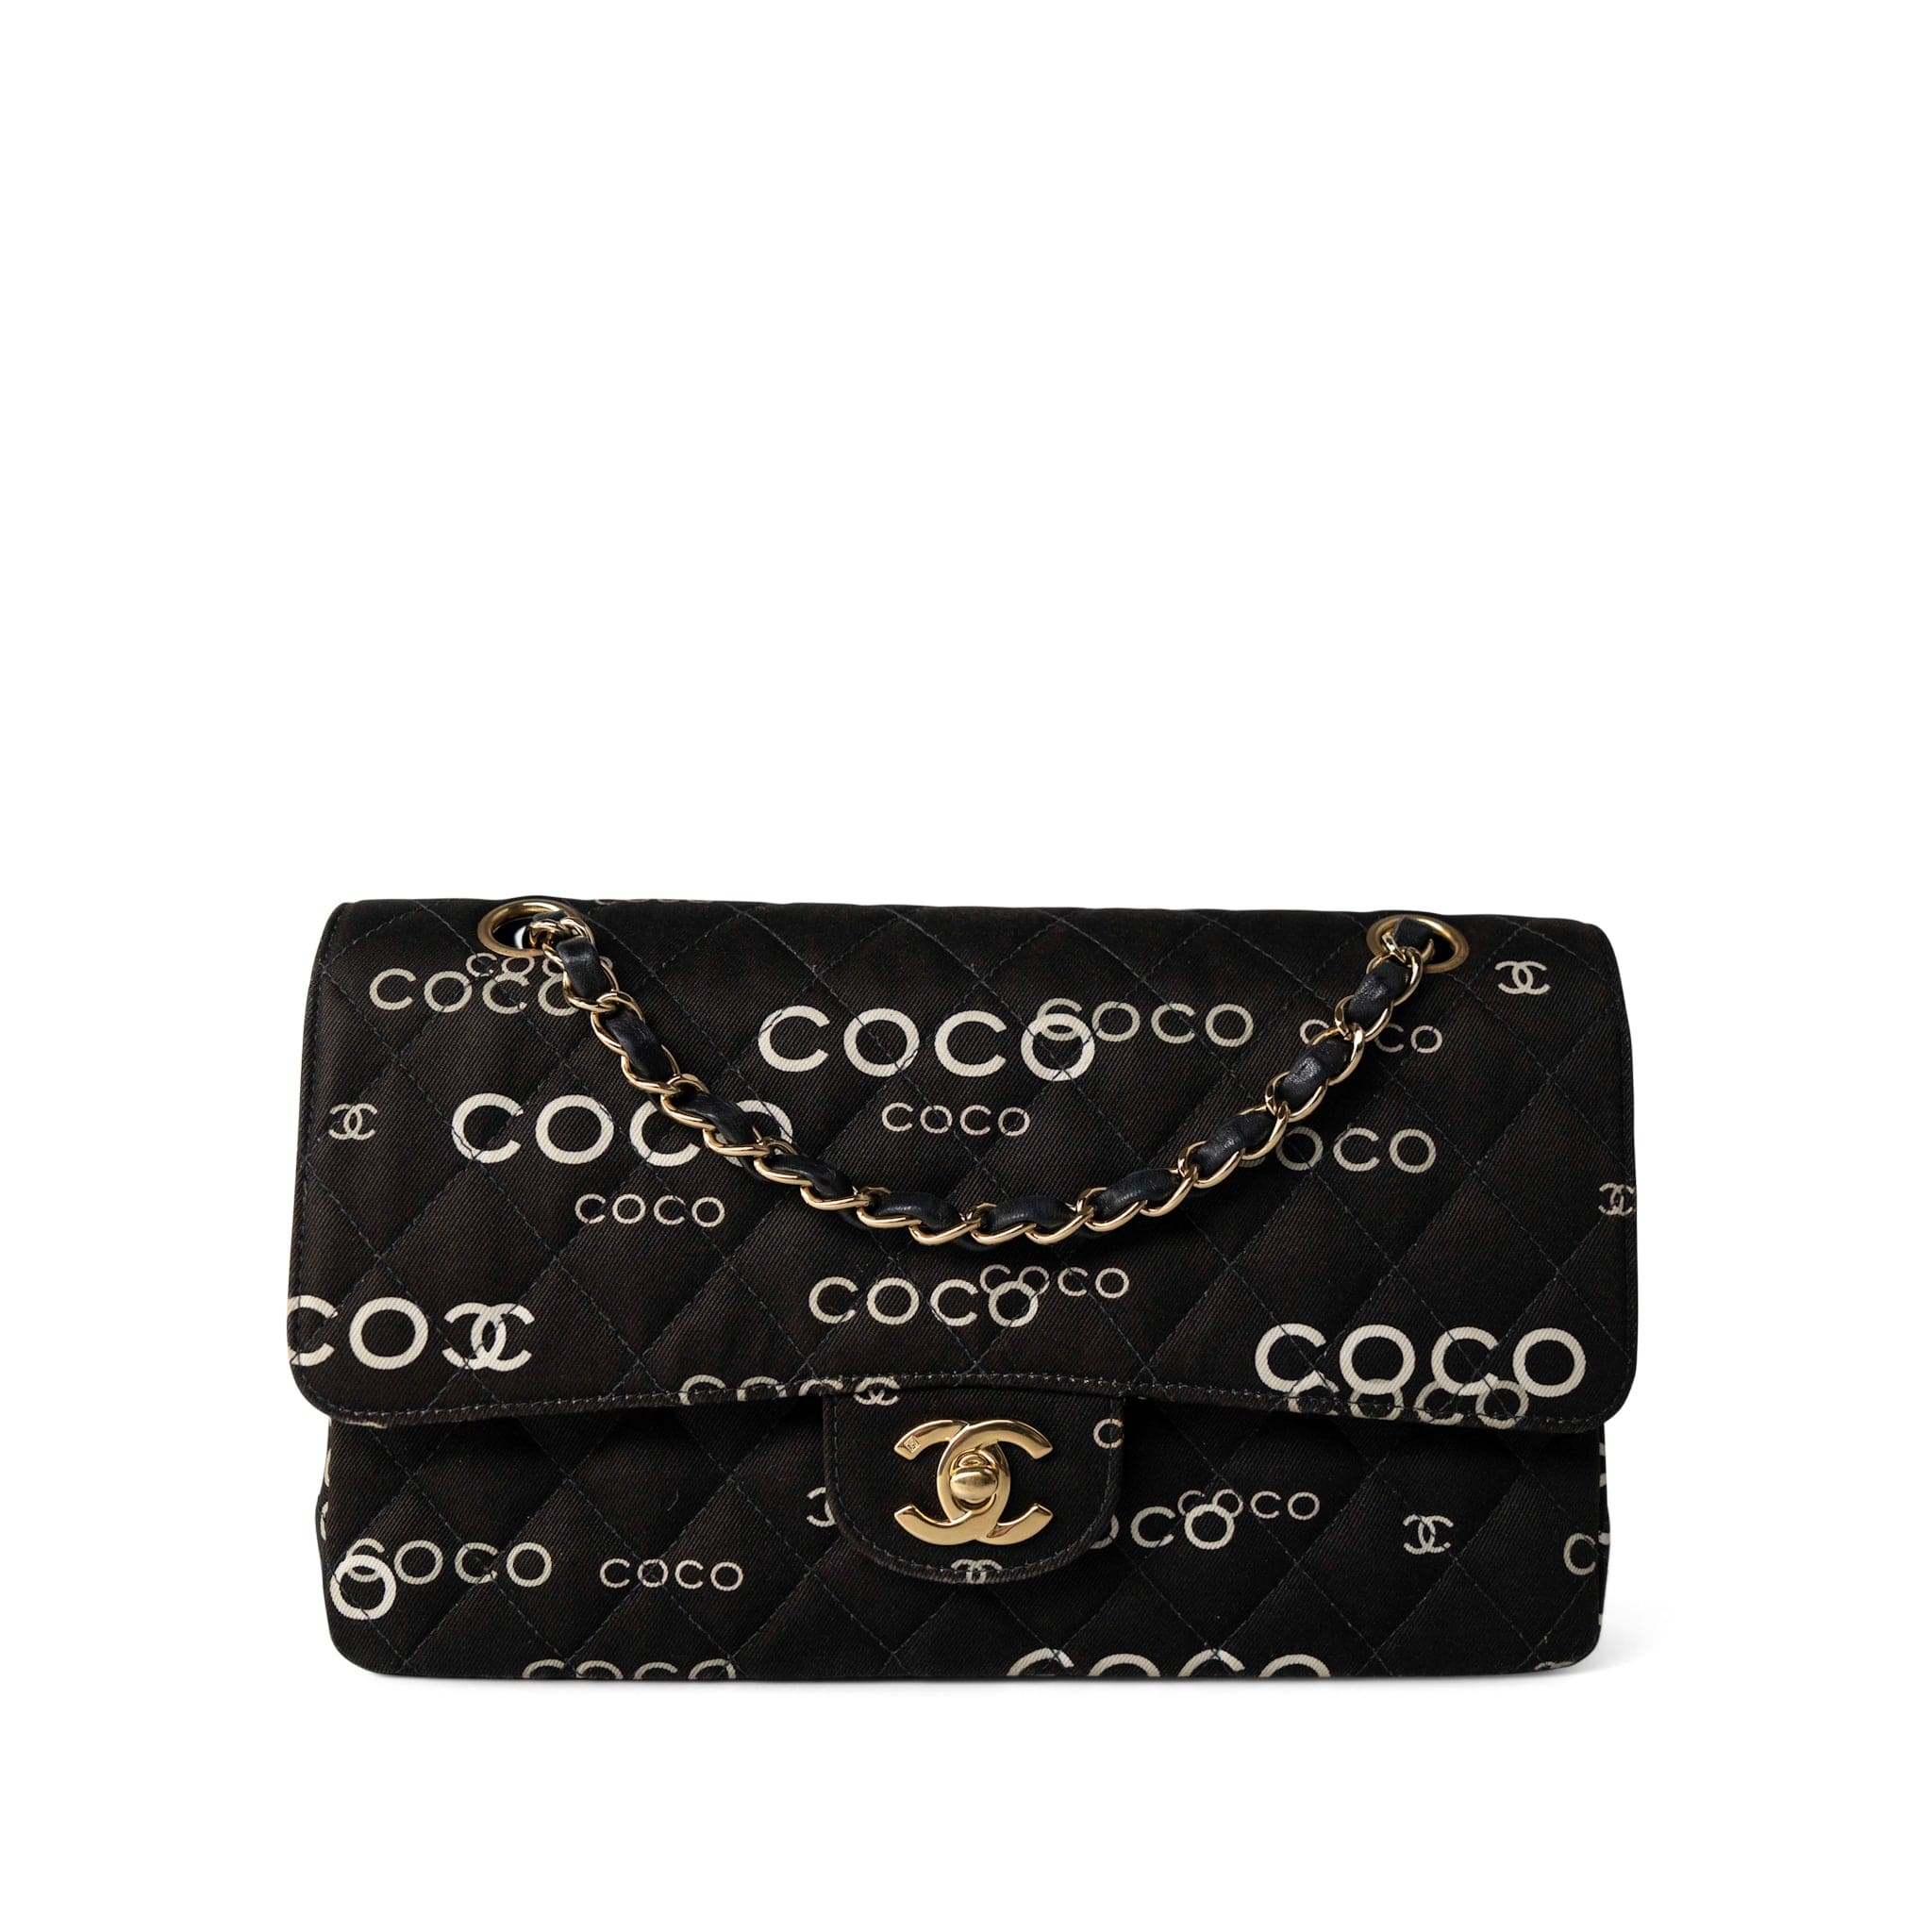 CHANEL Handbag Classic Flap / Black Black Canvas Quilted COCO Medium Classic Flap Light Gold Hardware - Redeluxe